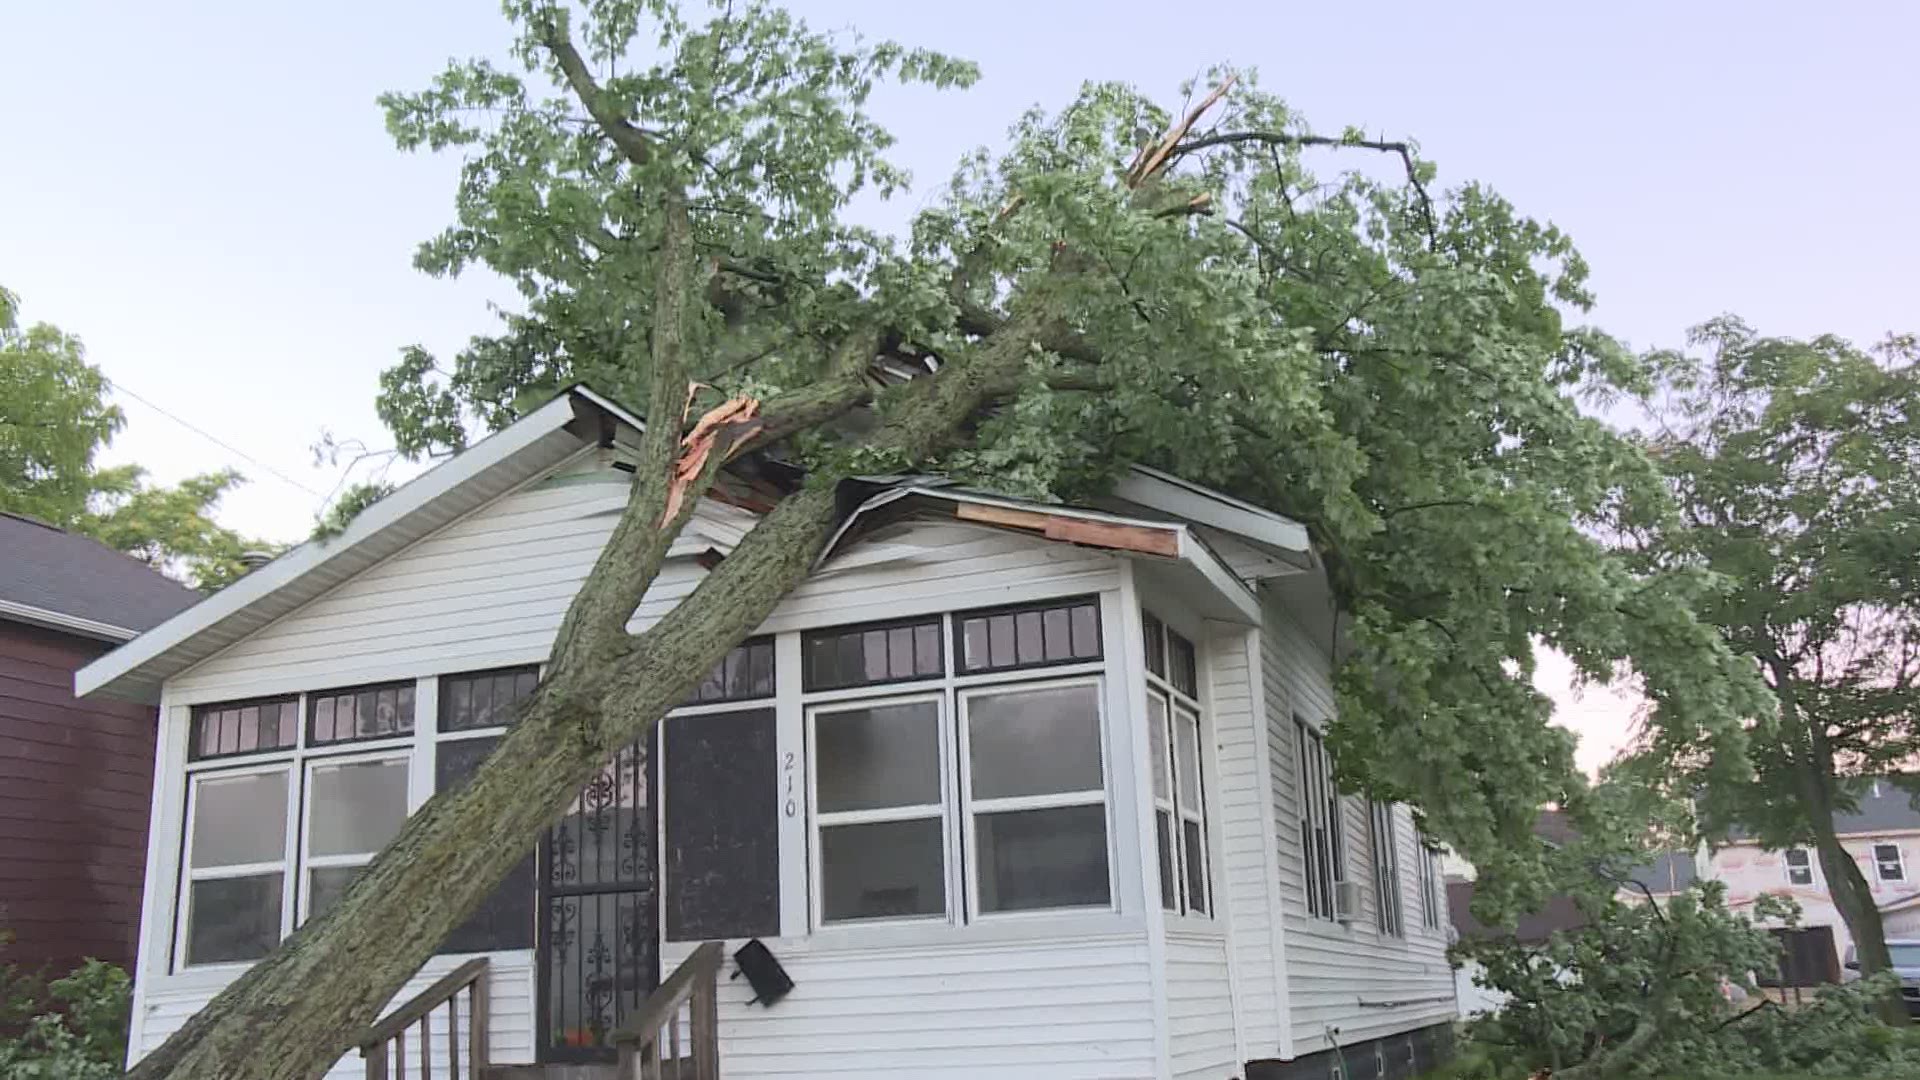 Reports of 45 mph wind gusts; at least one home damaged